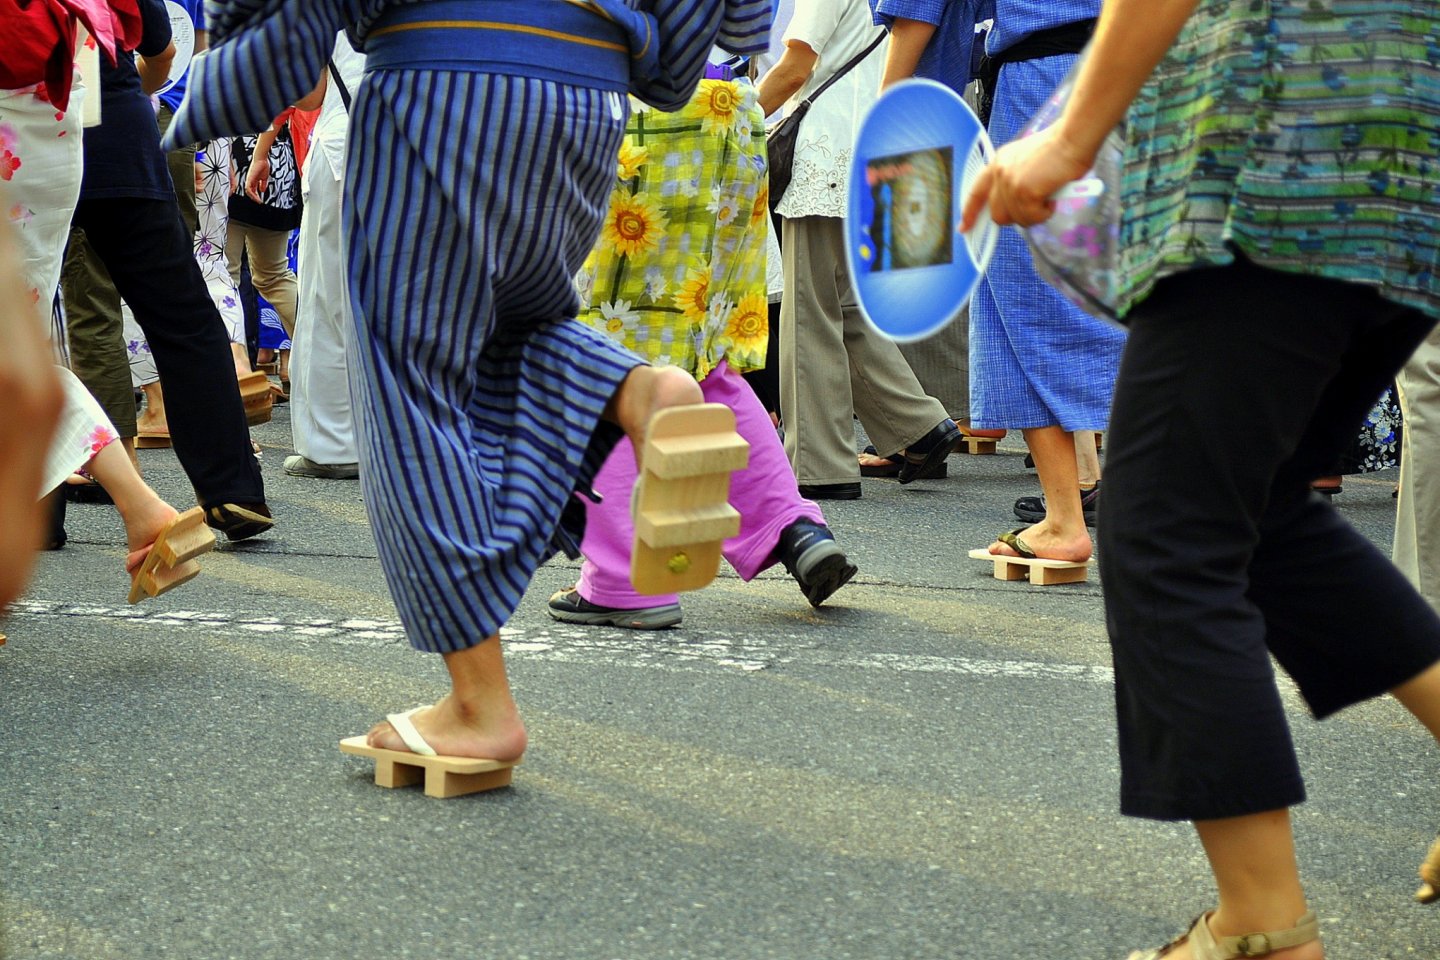 Participants wear traditional geta to add sound to their dancing; at this particular event, geta were sold on site